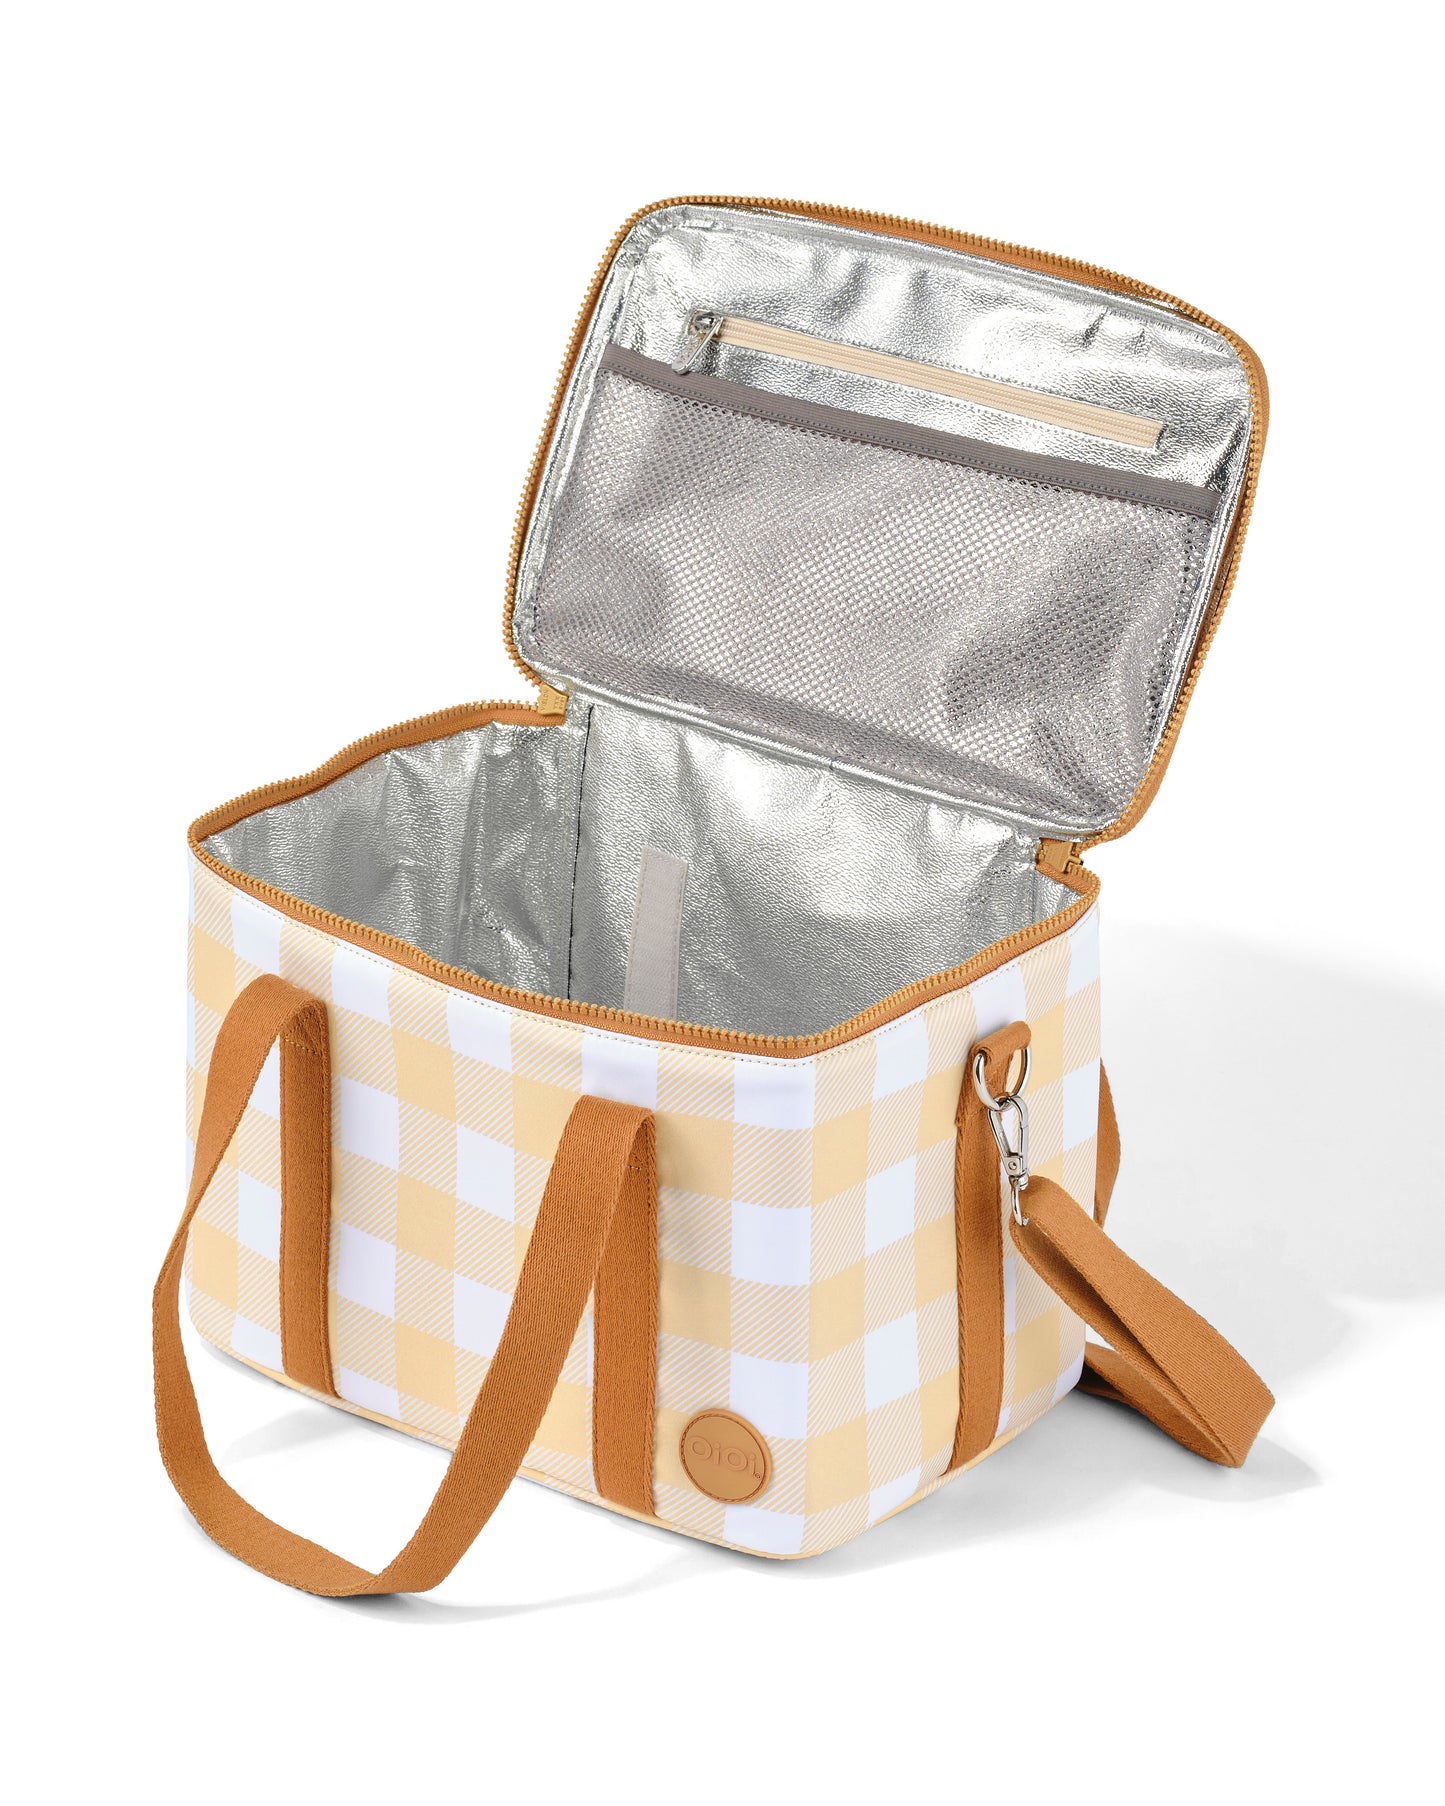 Maxi Insulated Lunch Bag- Beige Gingham